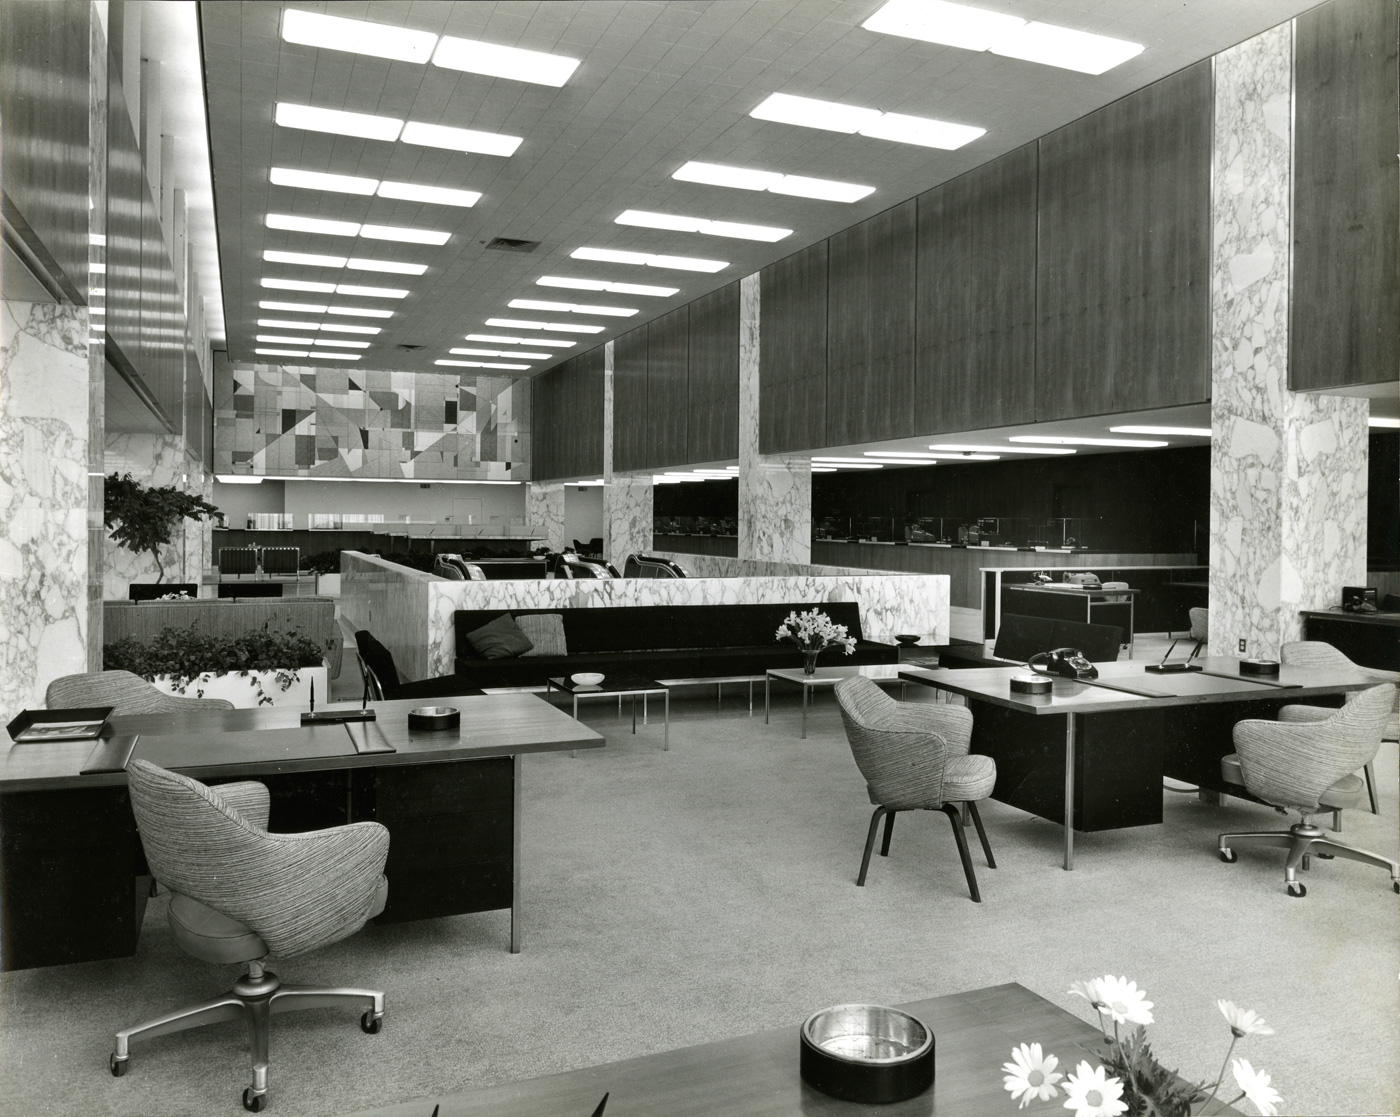 Black and white photo of banks interior in the 60s